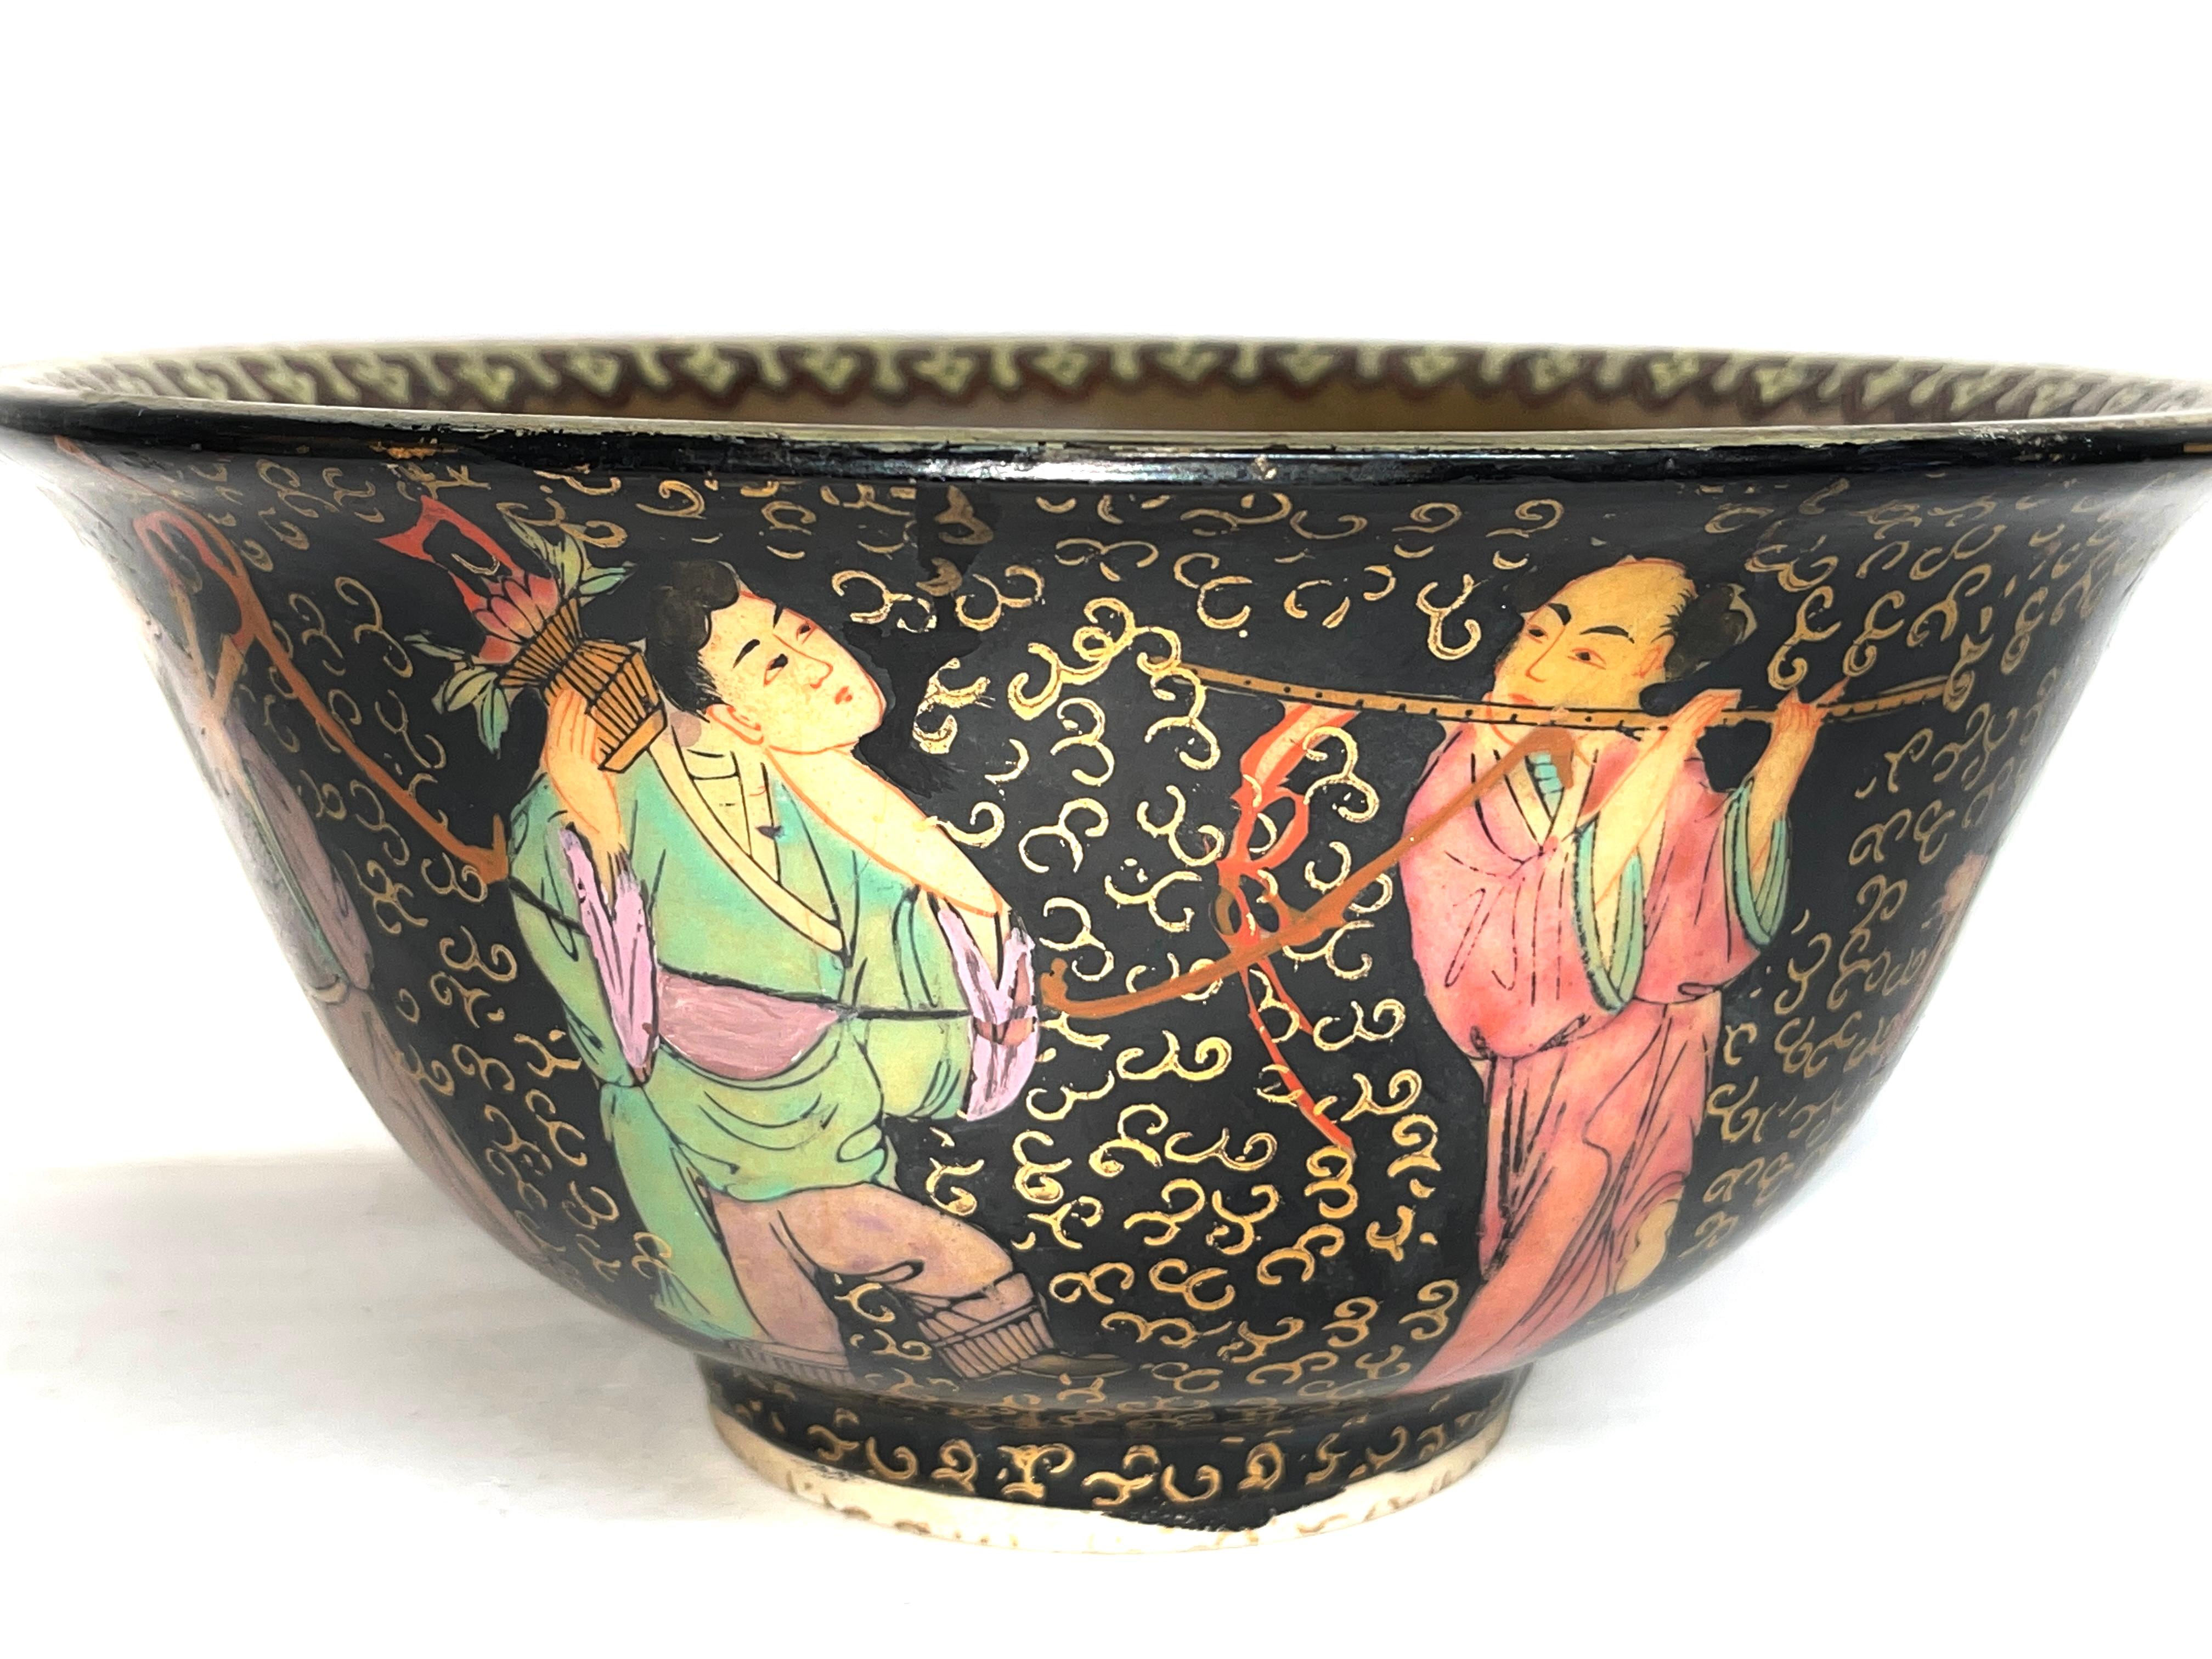 Pair of Antique Chinese Ceramic Bowls, 20th Century, Asian Art For Sale 6